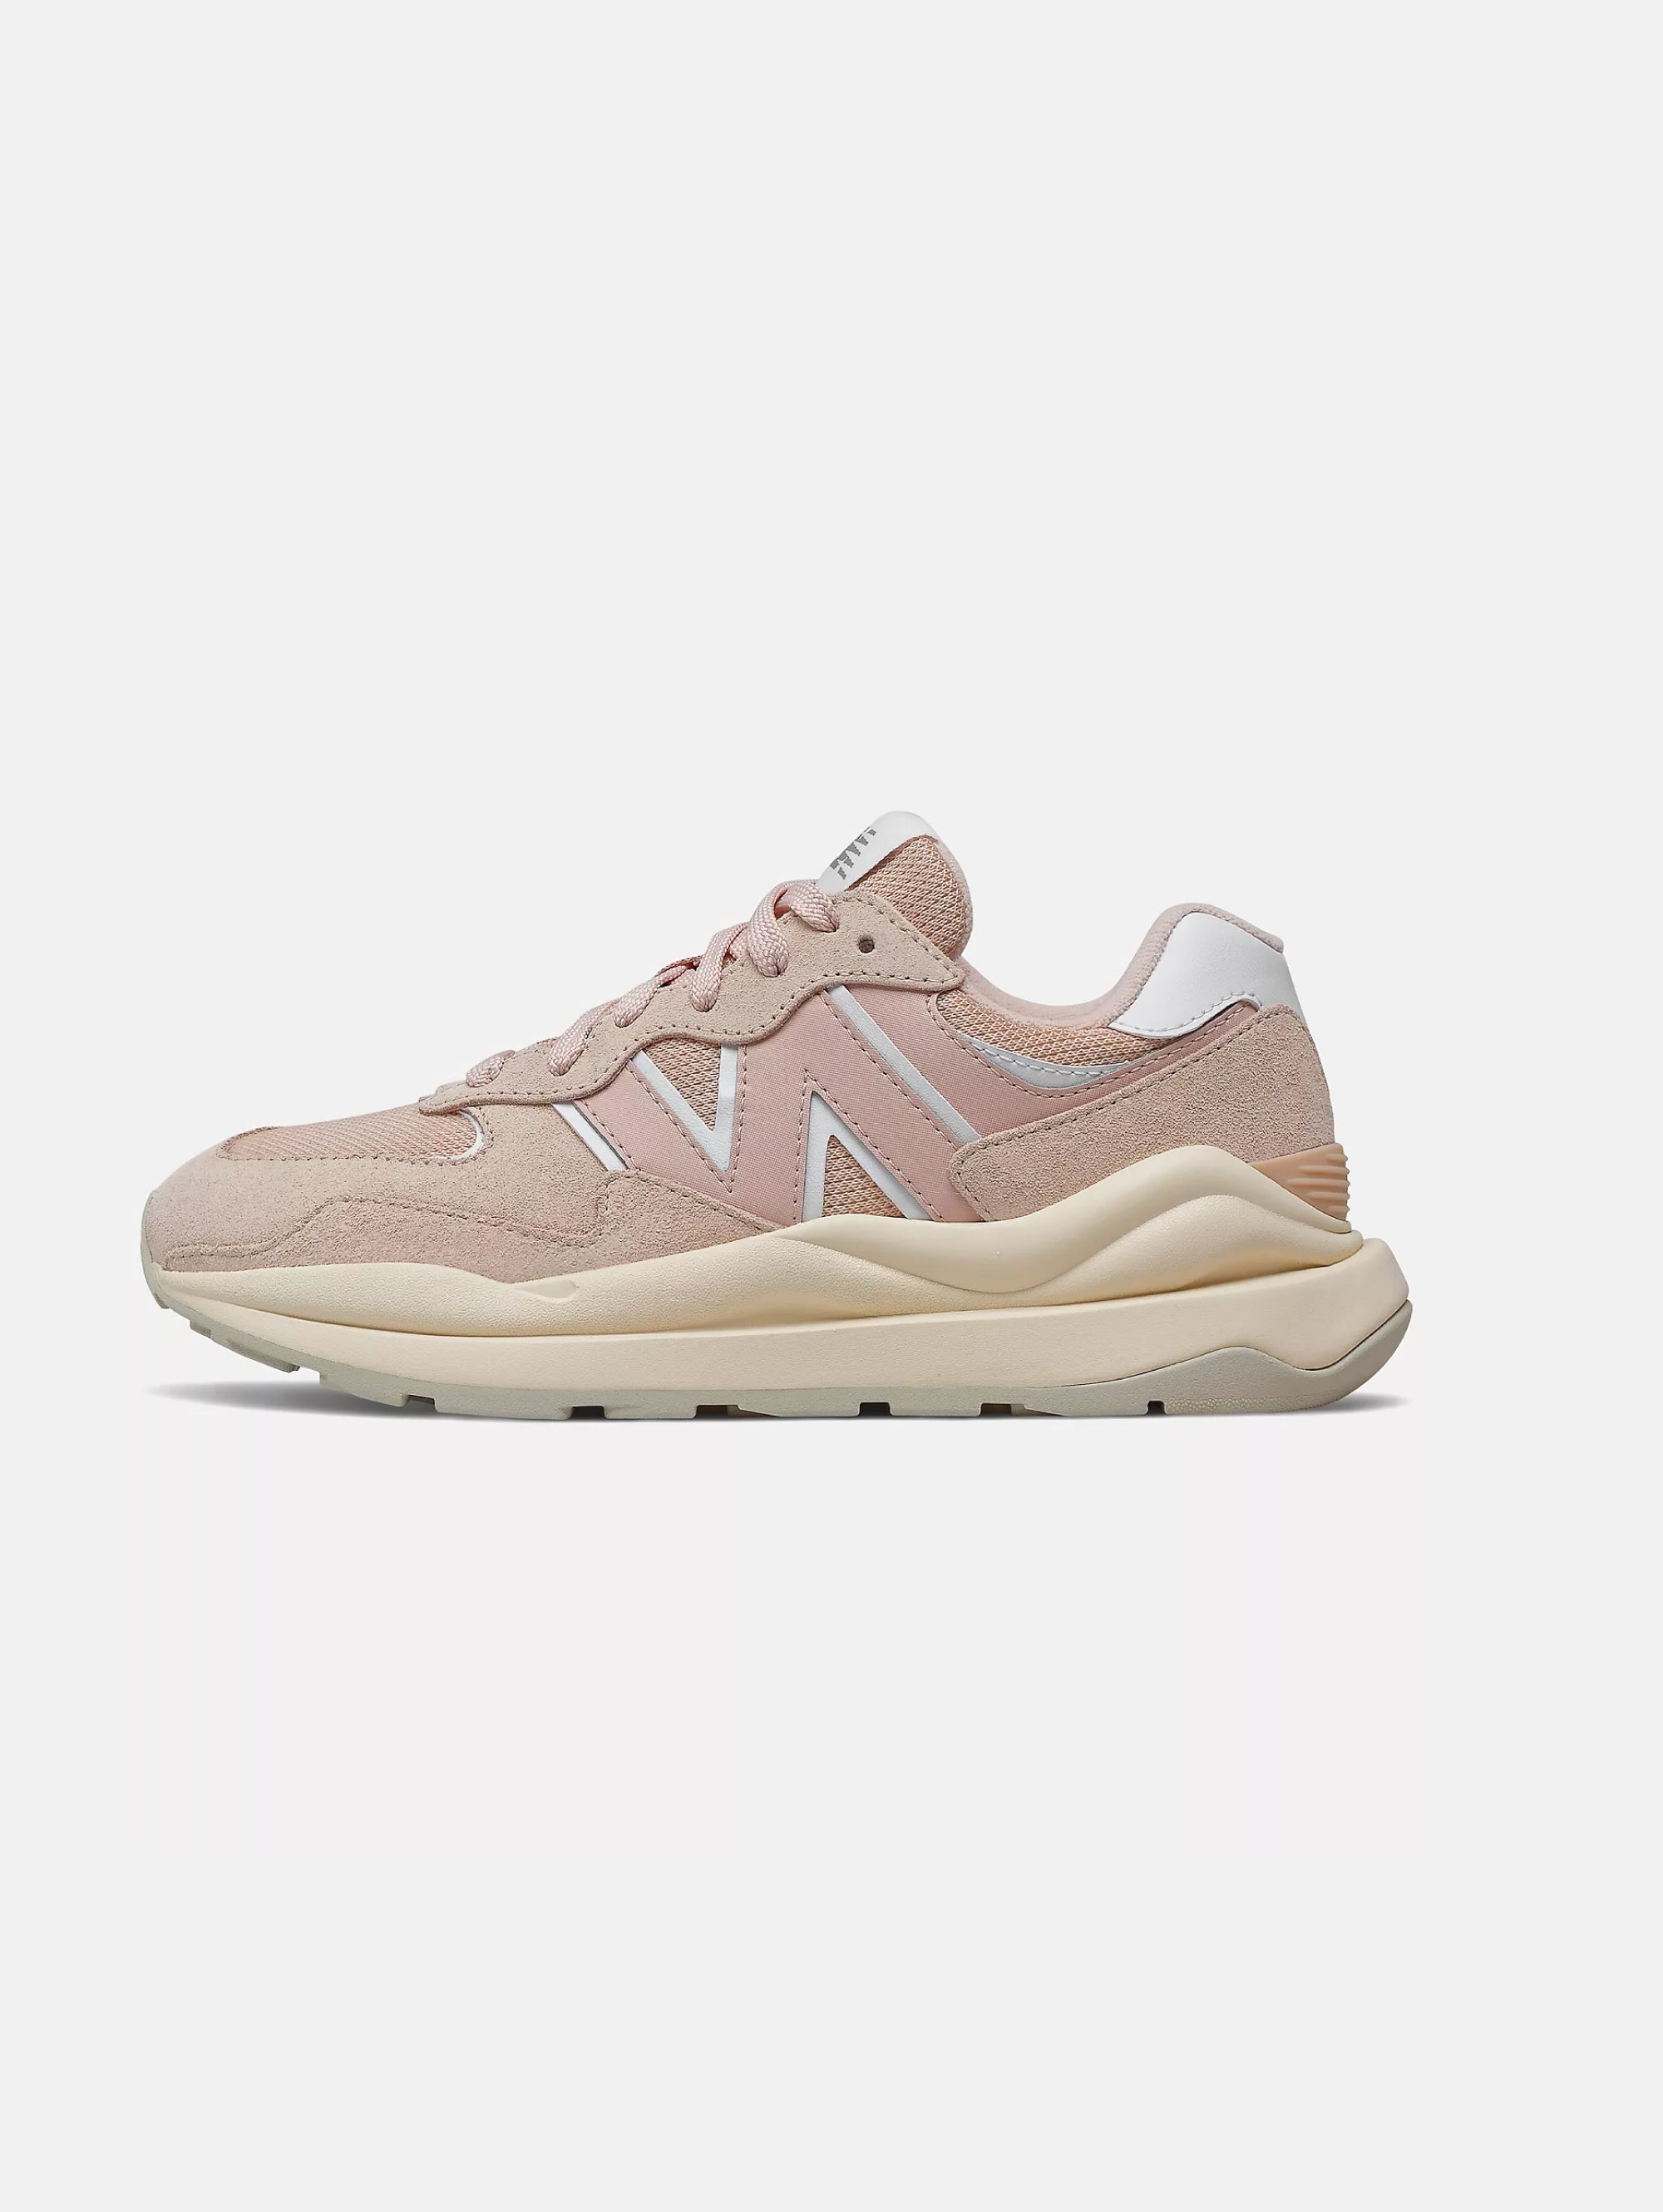 NEW BALANCE-Sneakers Lifestyle 57/40 Rosa-TRYME Shop